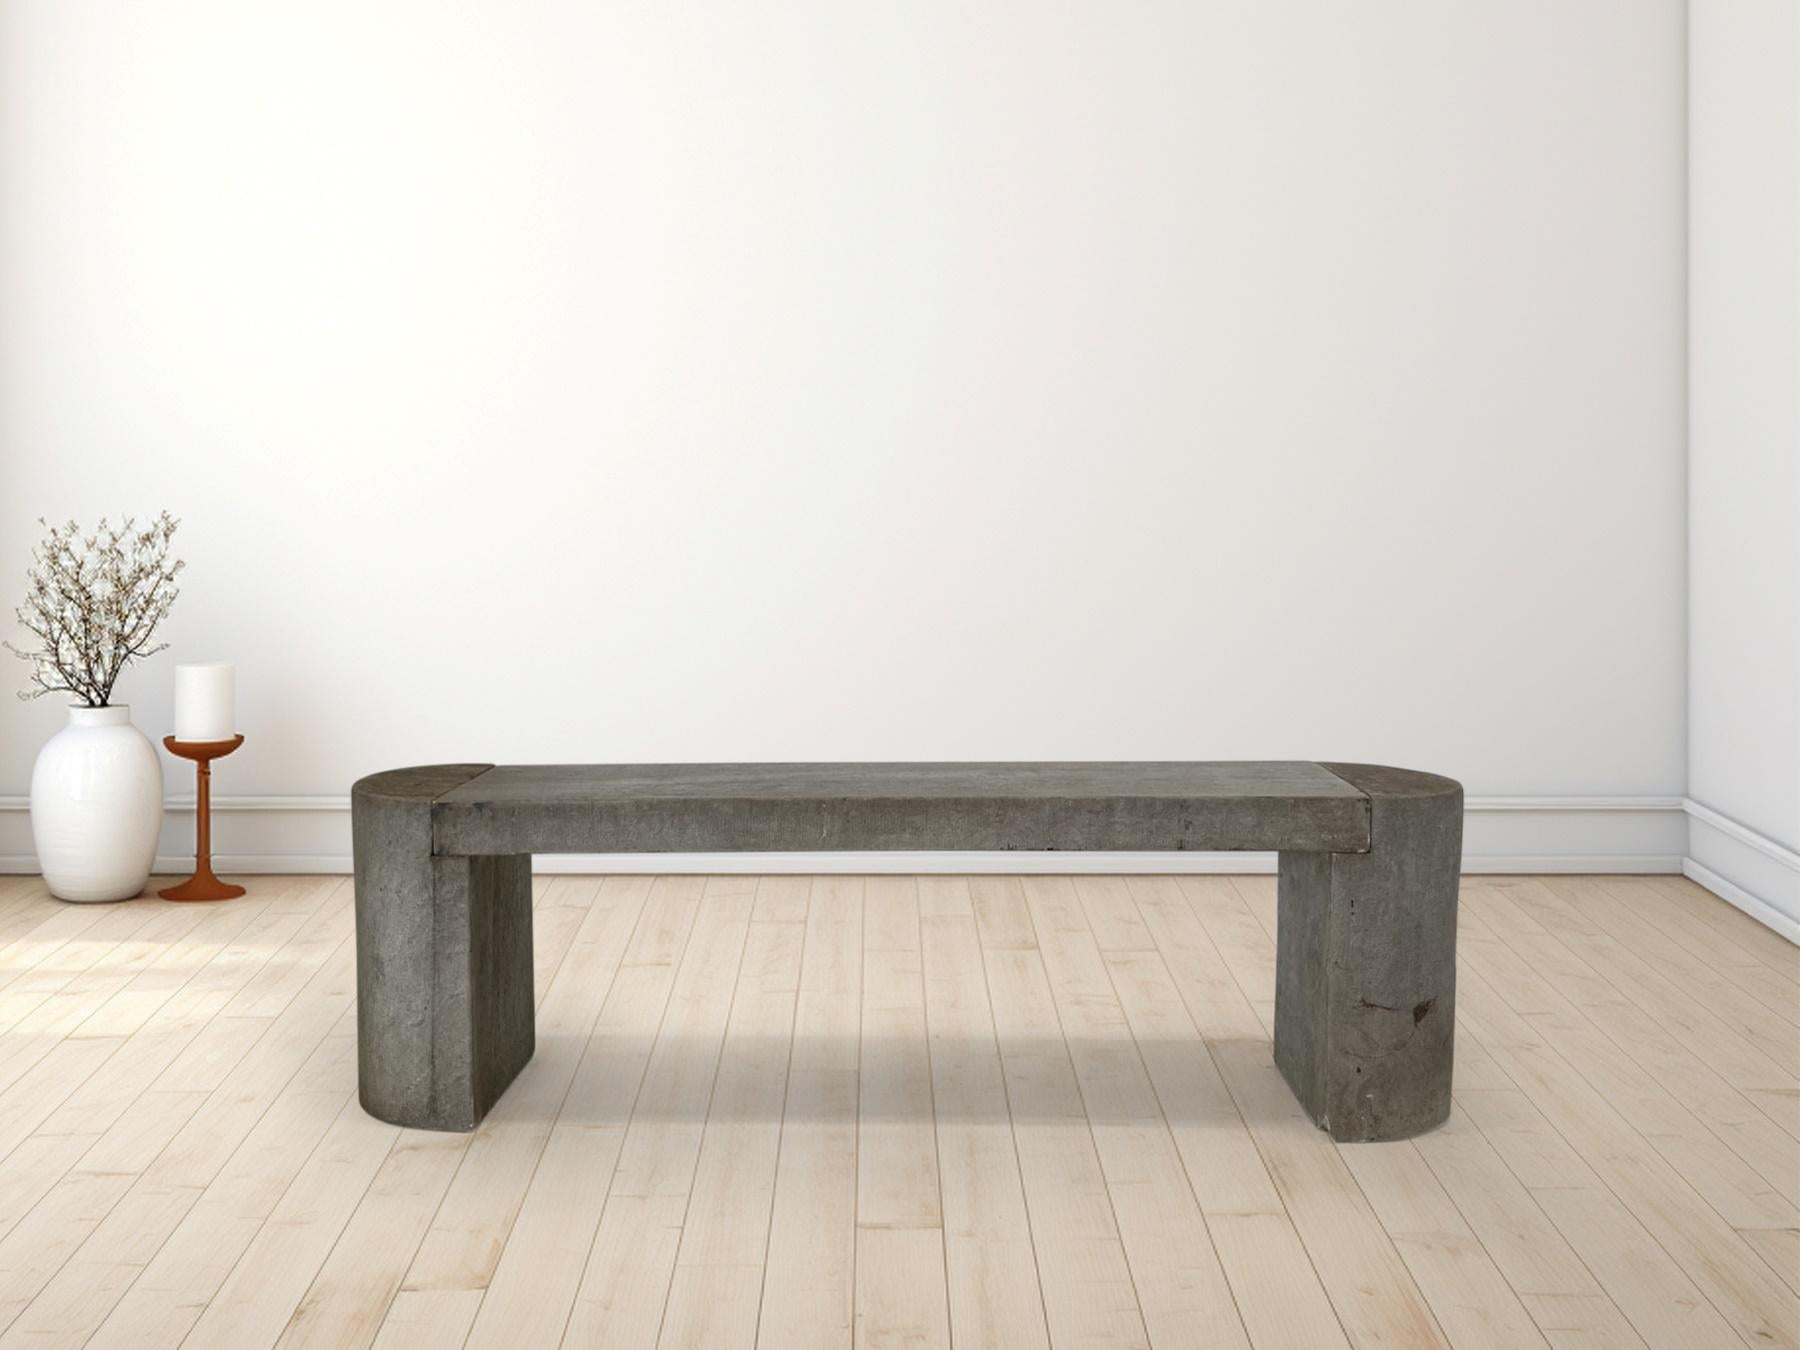 A modernist concrete bench seat with a lovely aged patina, suitable for interior or exterior use, the bench seat has great form and colour, and would make a wonderful feature piece.  The seat top (middle section) has a polished sealed surface with